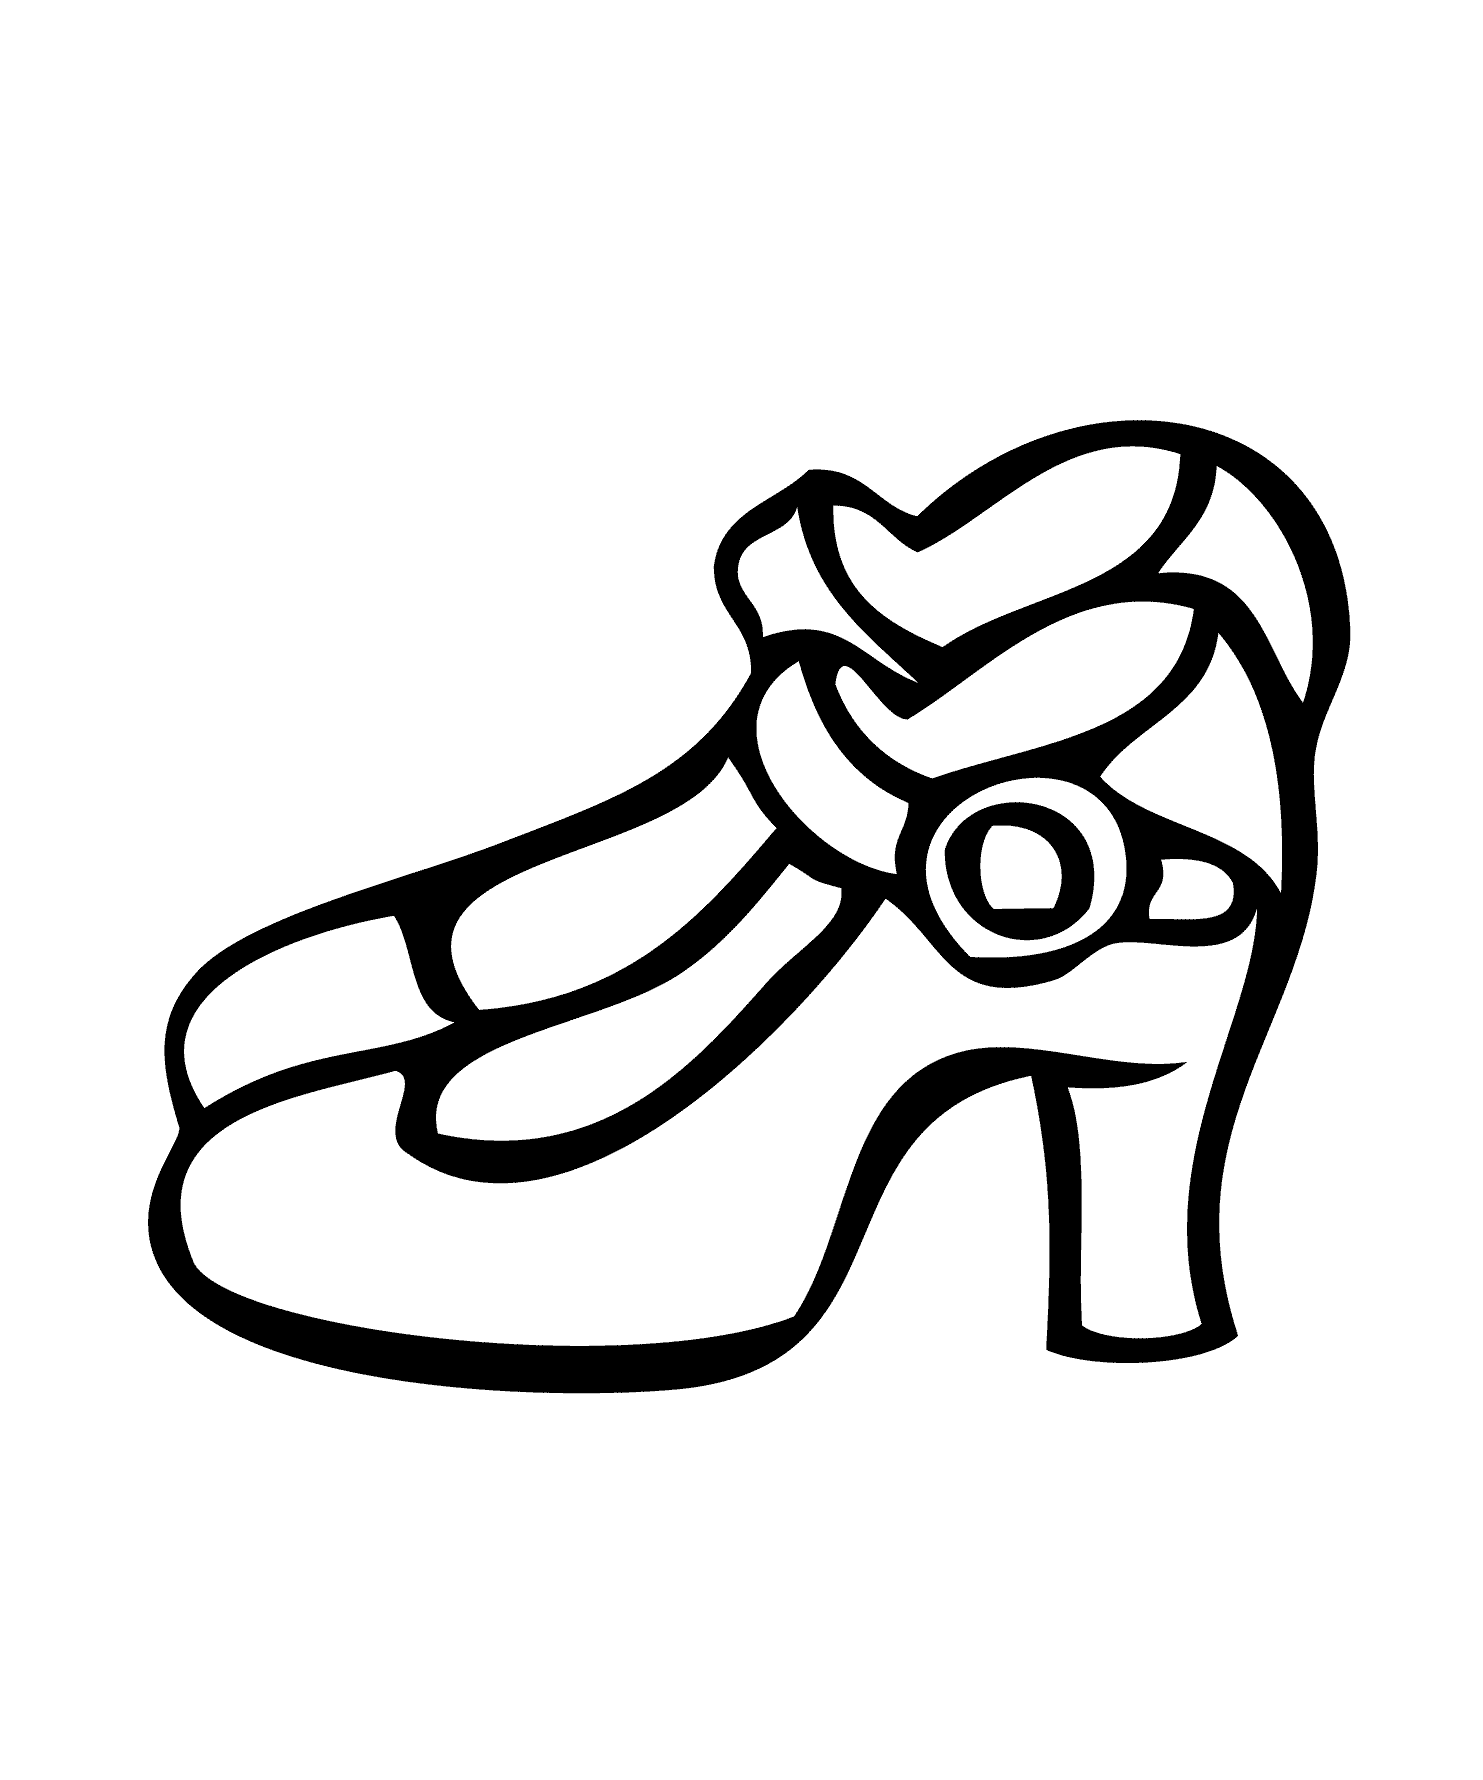 shoes for coloring shoes clipart black and white clipart panda free shoes for coloring 